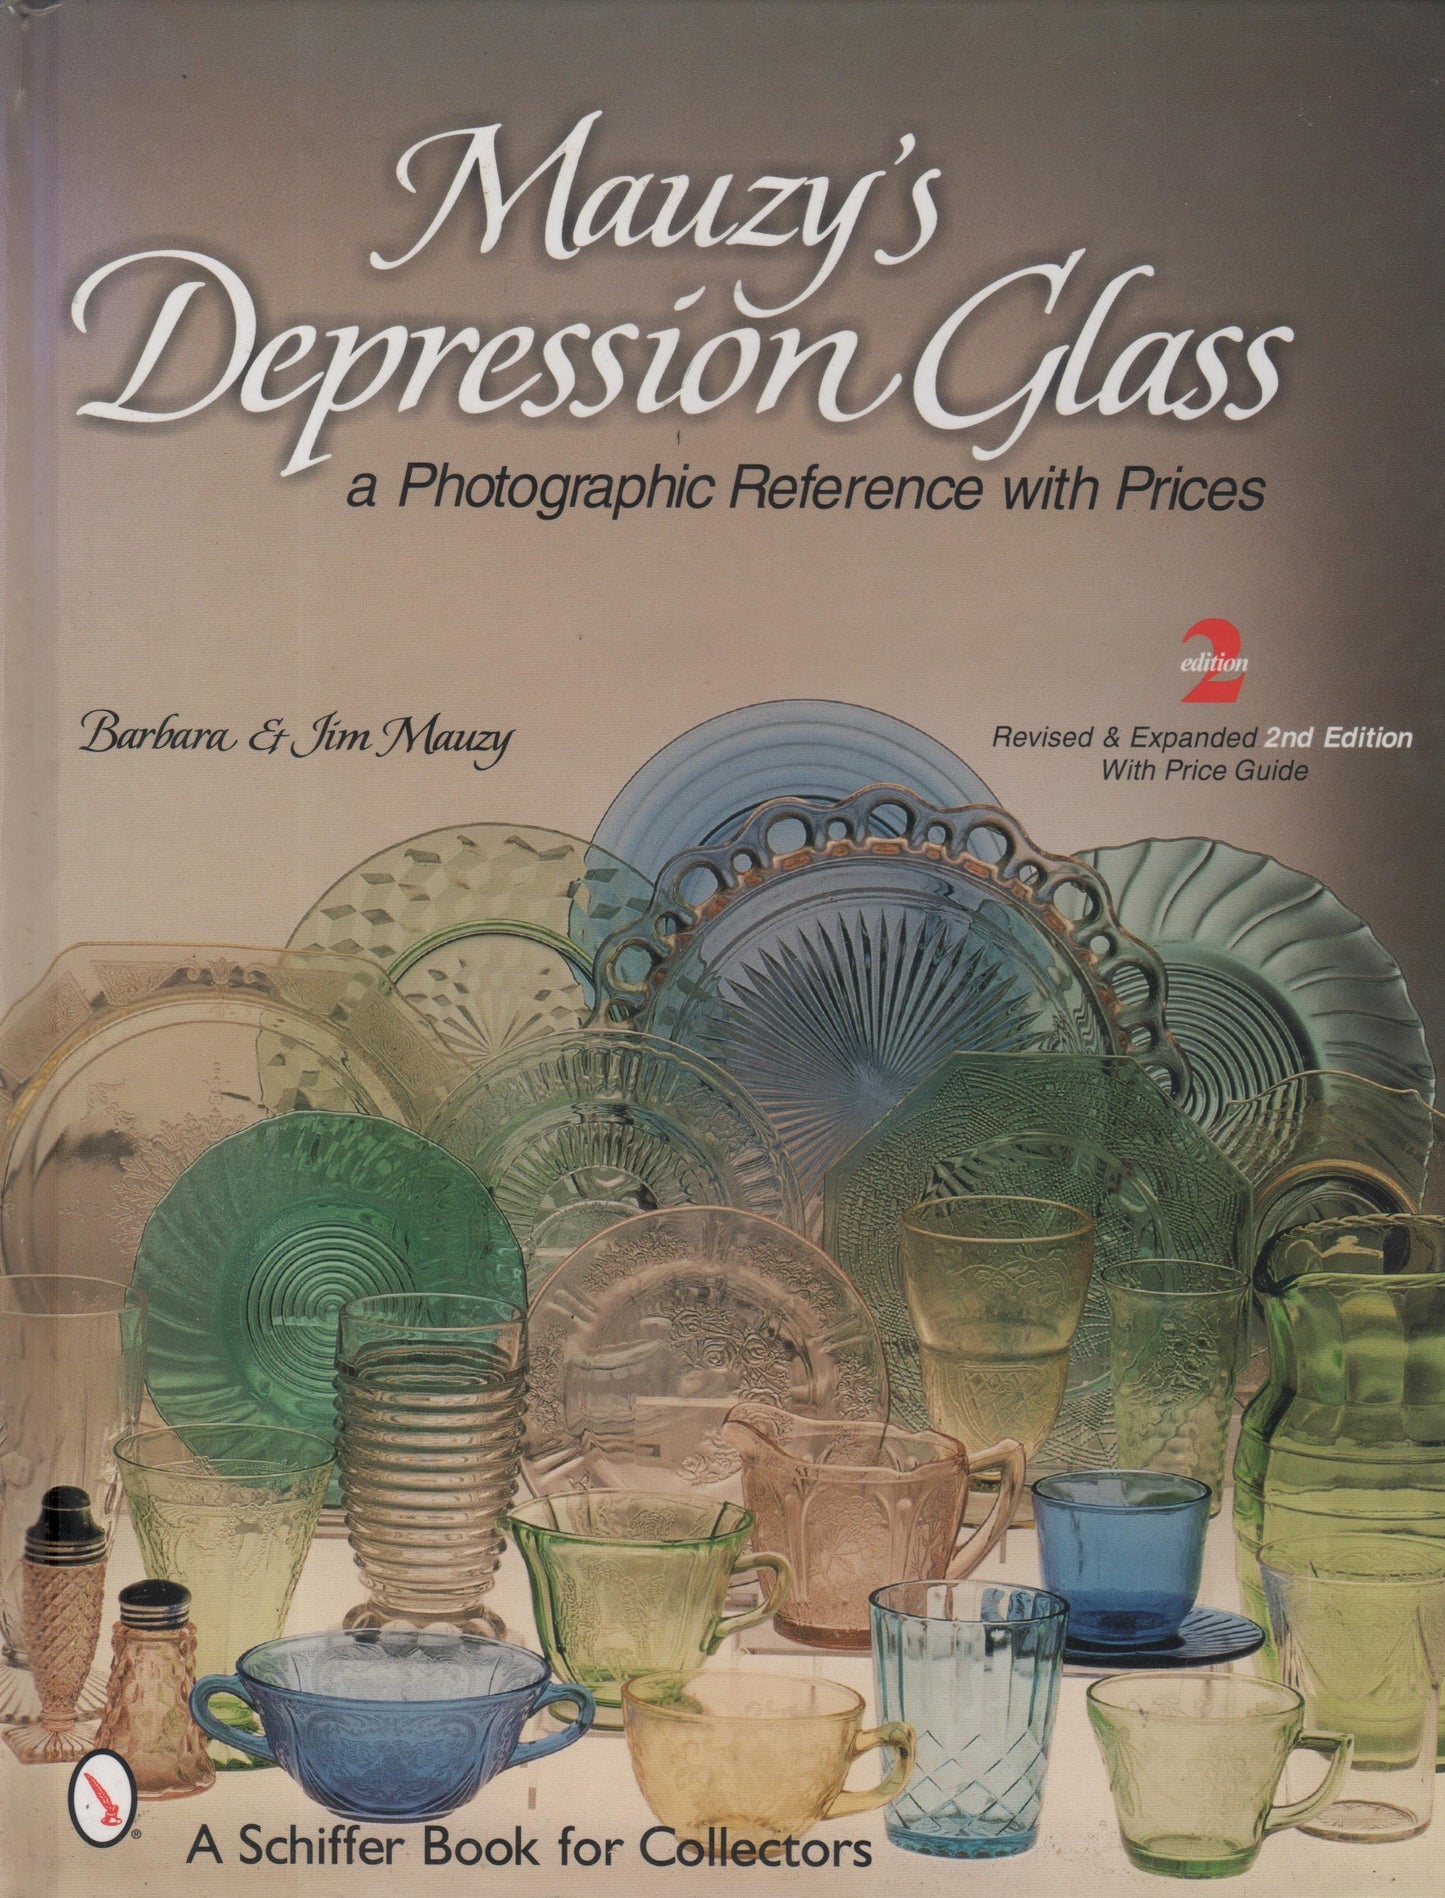 Mauzy's Depression Glass: A Phographic Reference with Prices